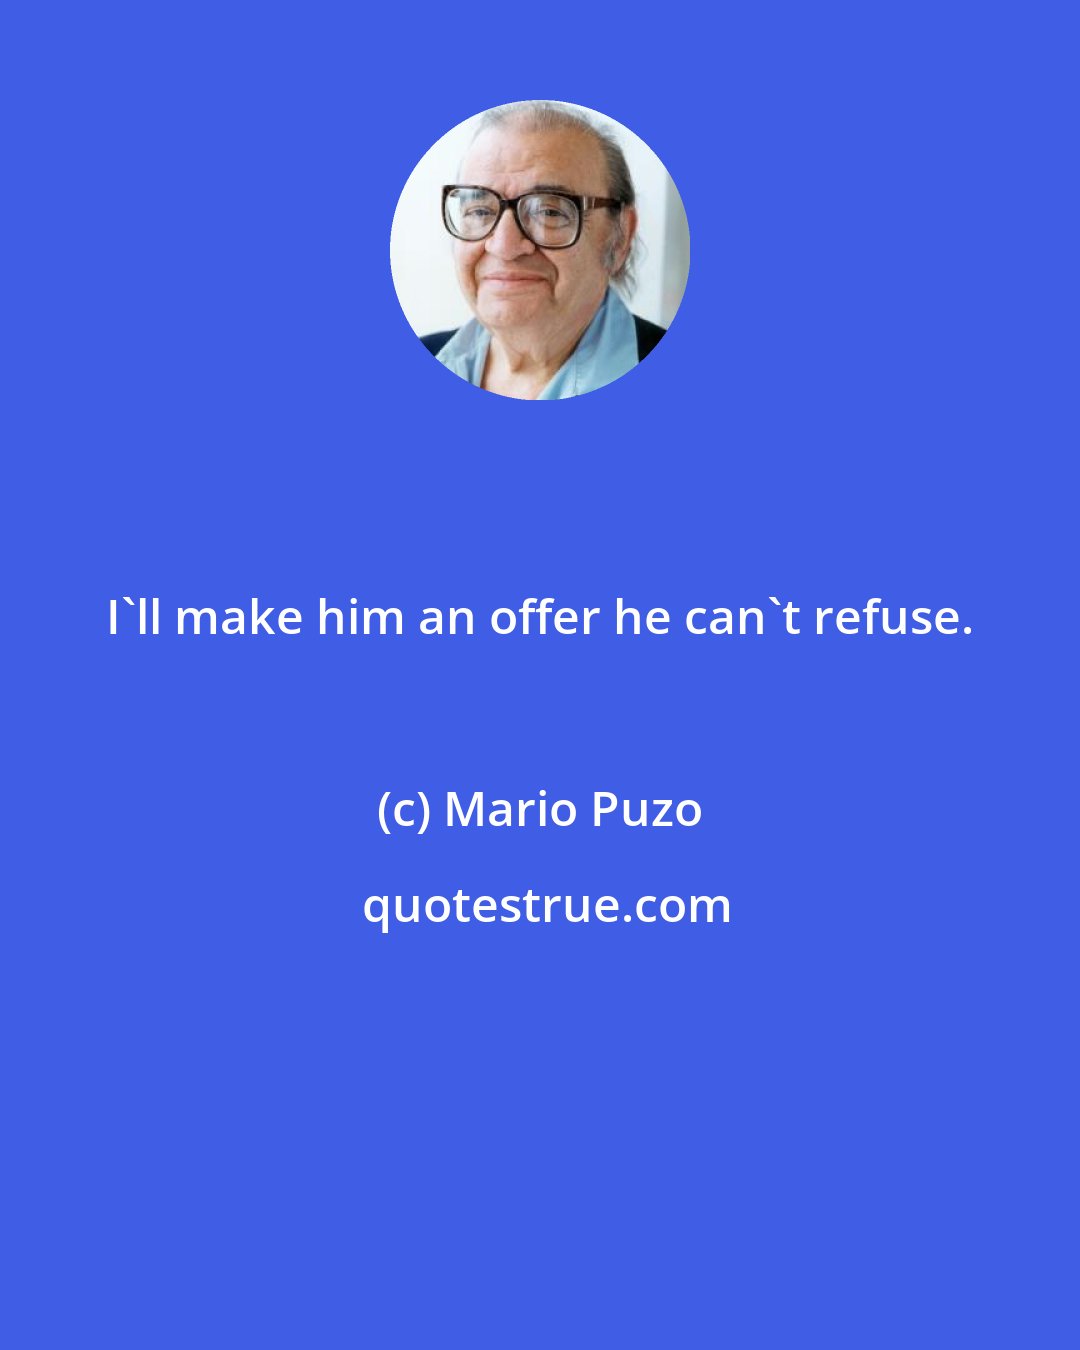 Mario Puzo: I'll make him an offer he can't refuse.